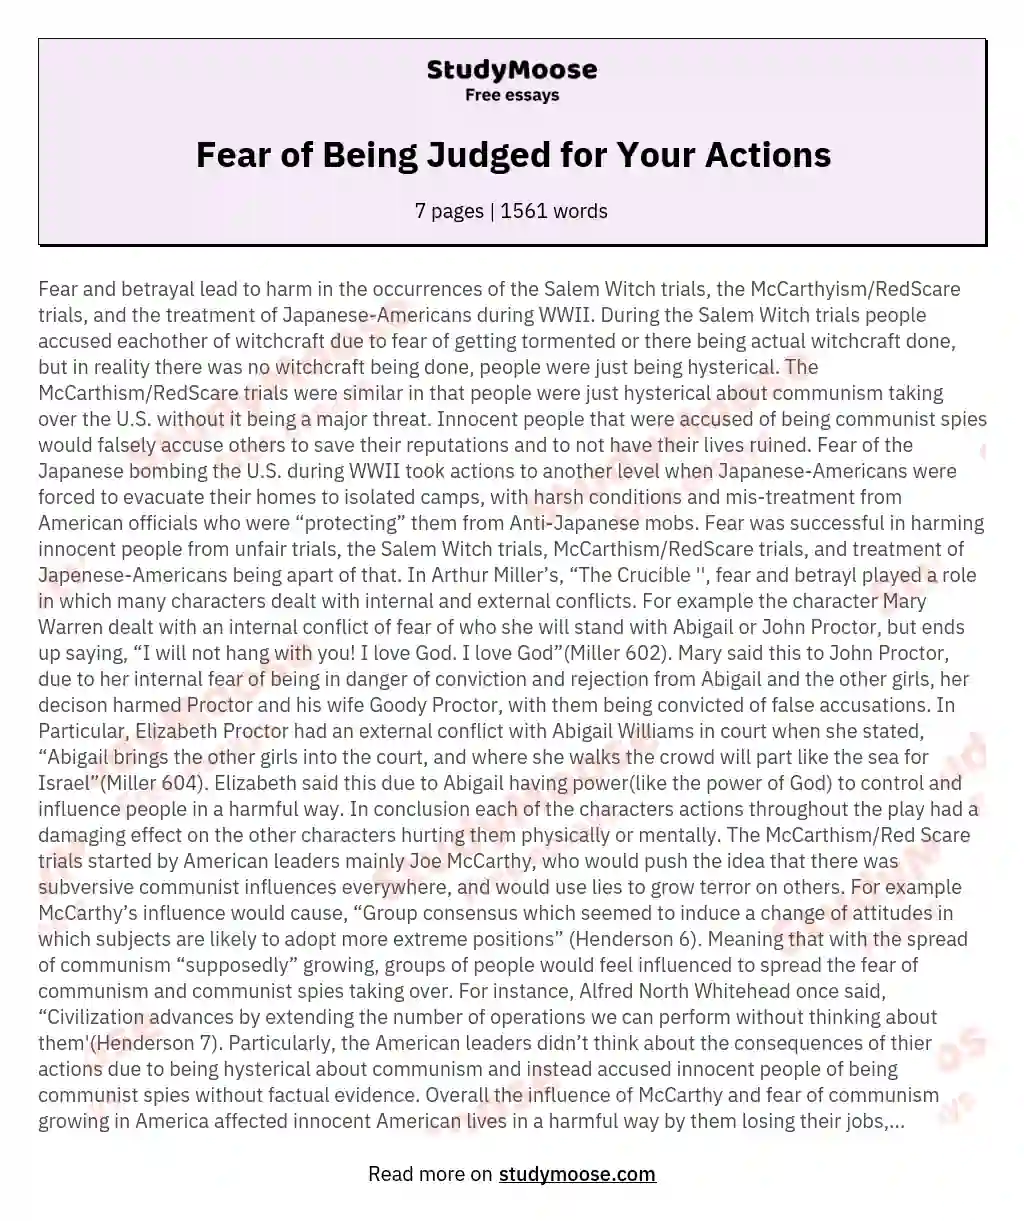 Fear of Being Judged for Your Actions essay